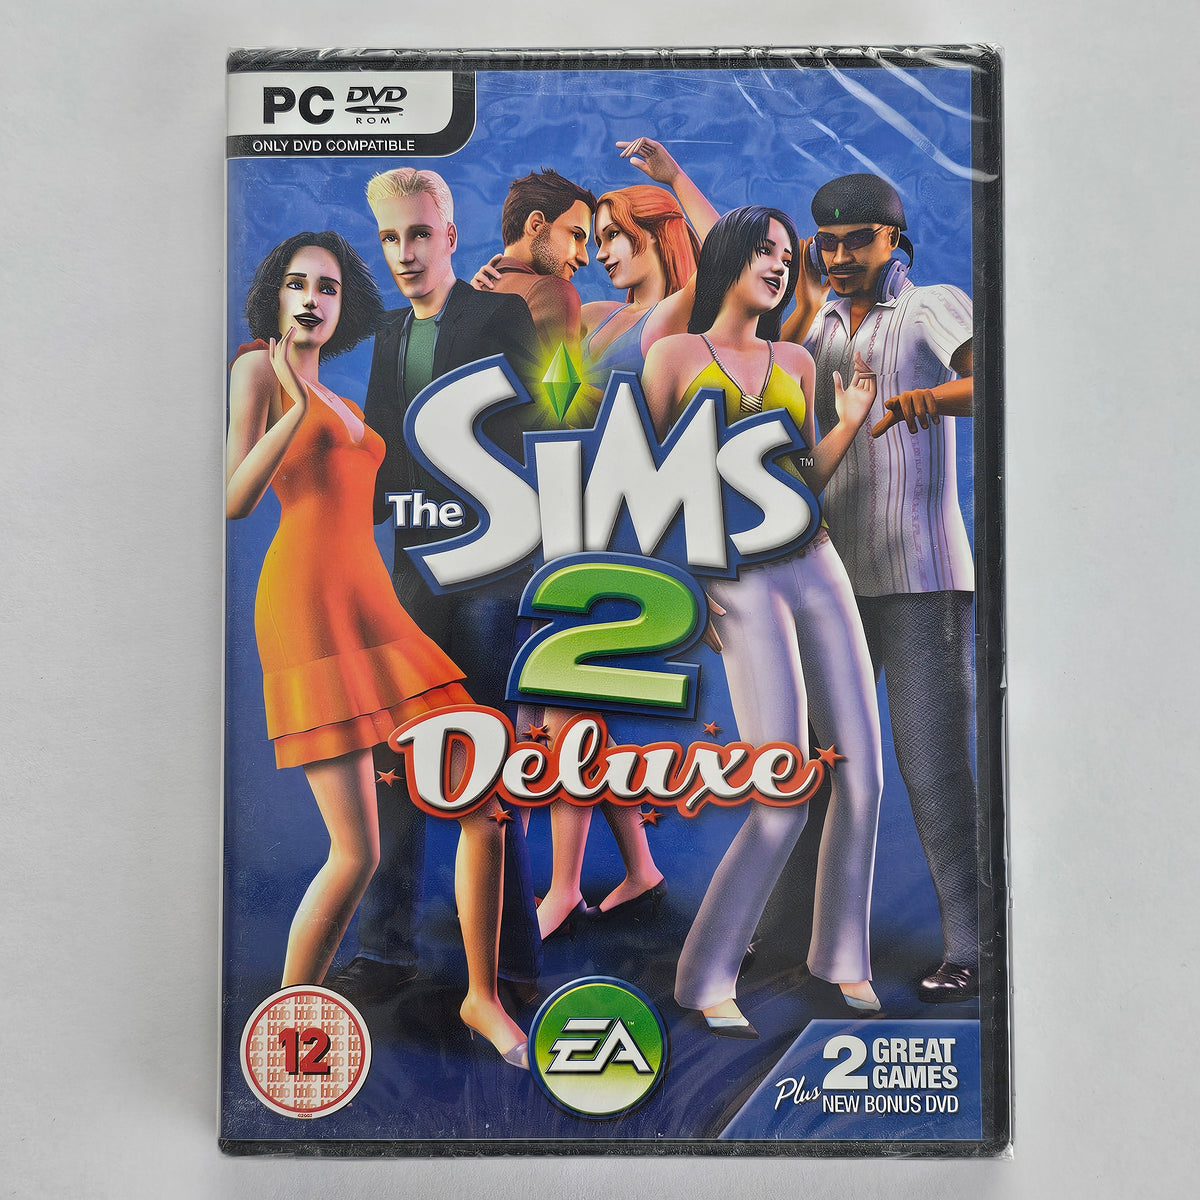 The Sims 2: Deluxe [PC] Windows